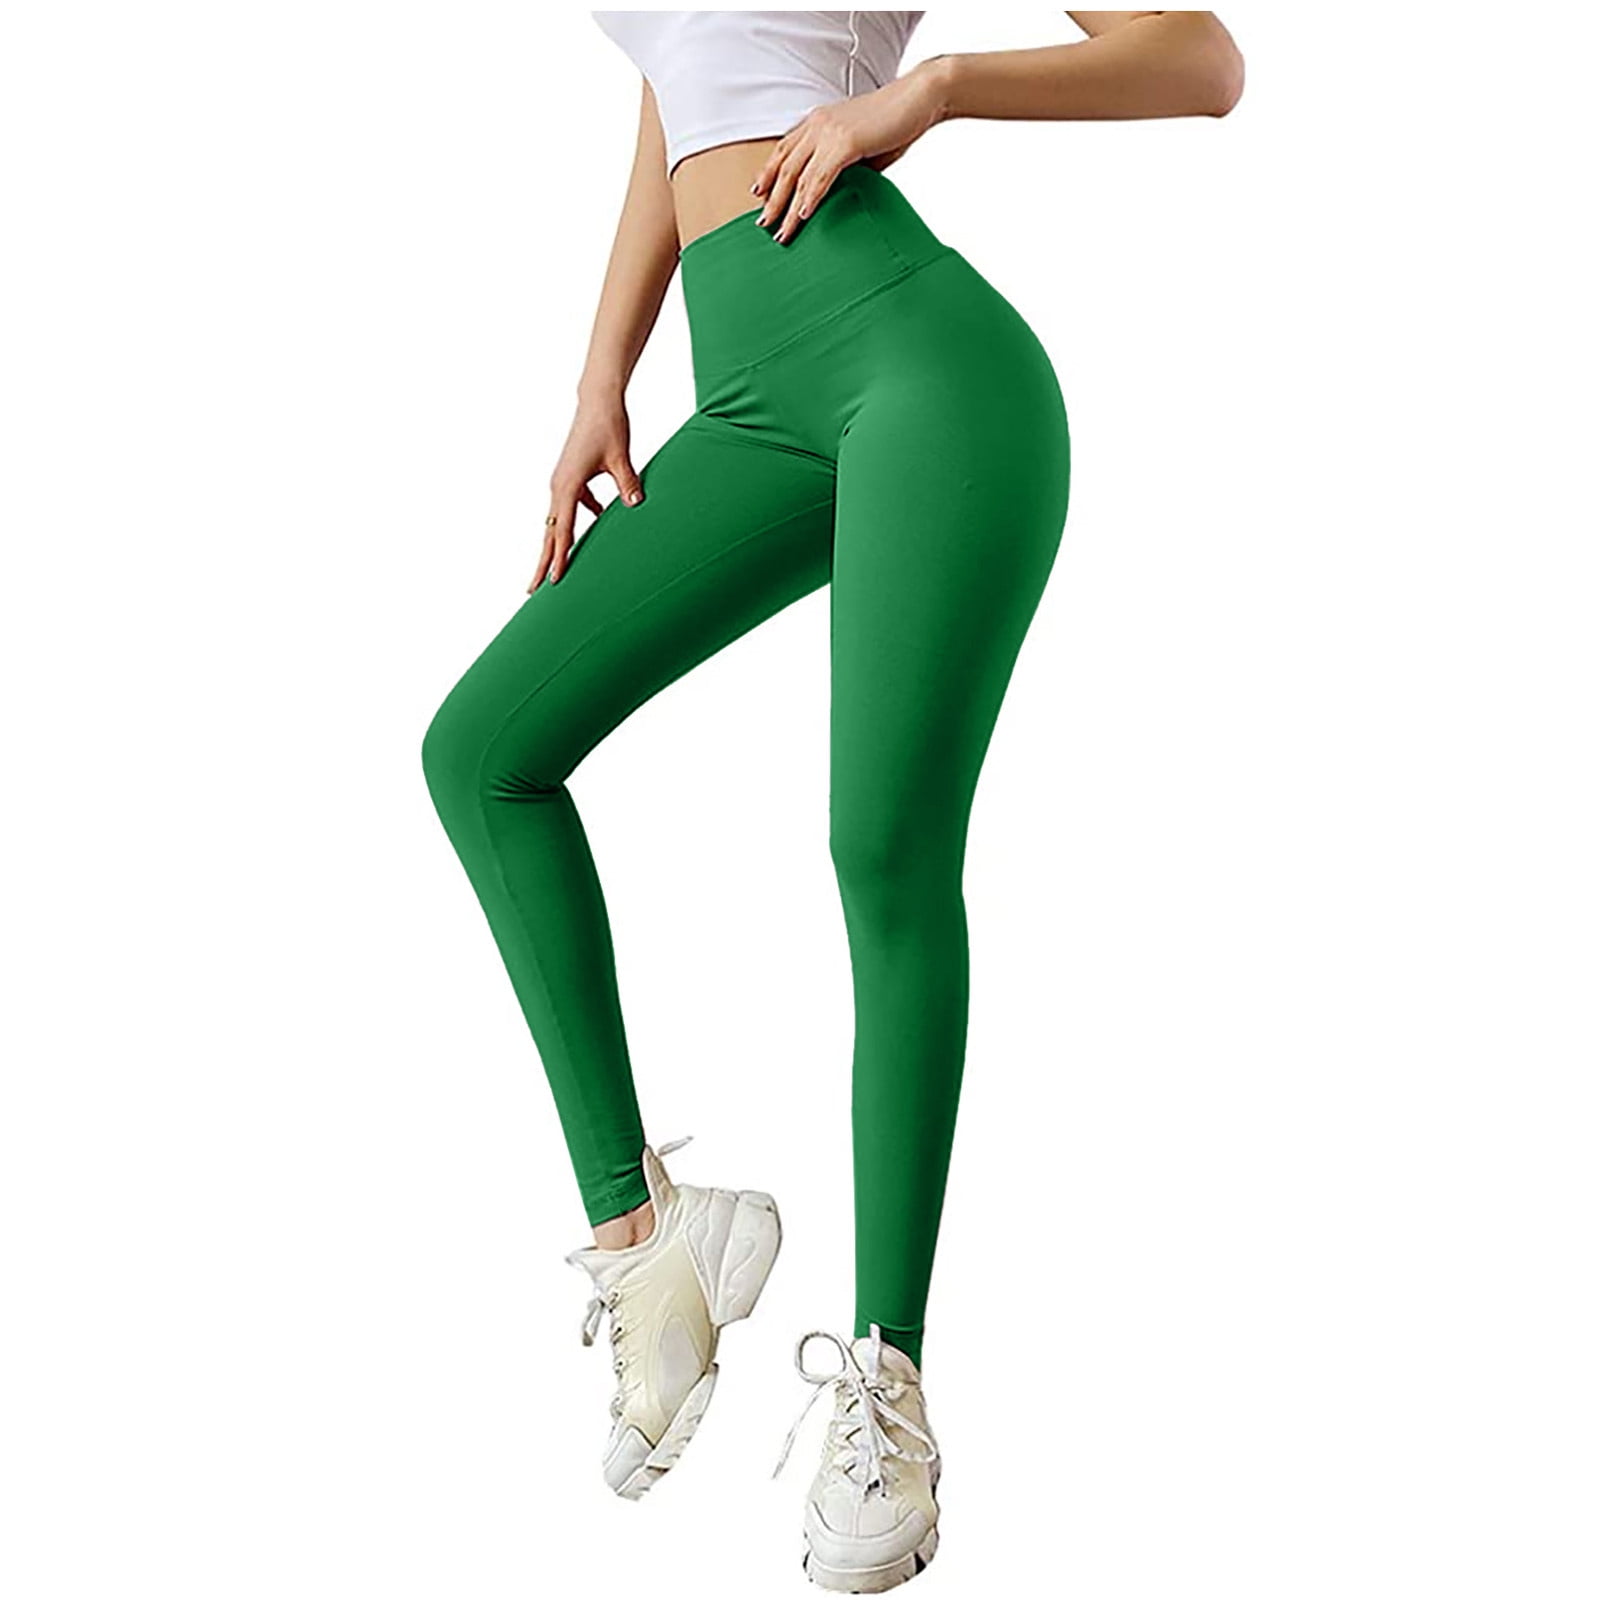 Outfmvch Yoga Pants Women Sweatpants Women Polyester Relaxed